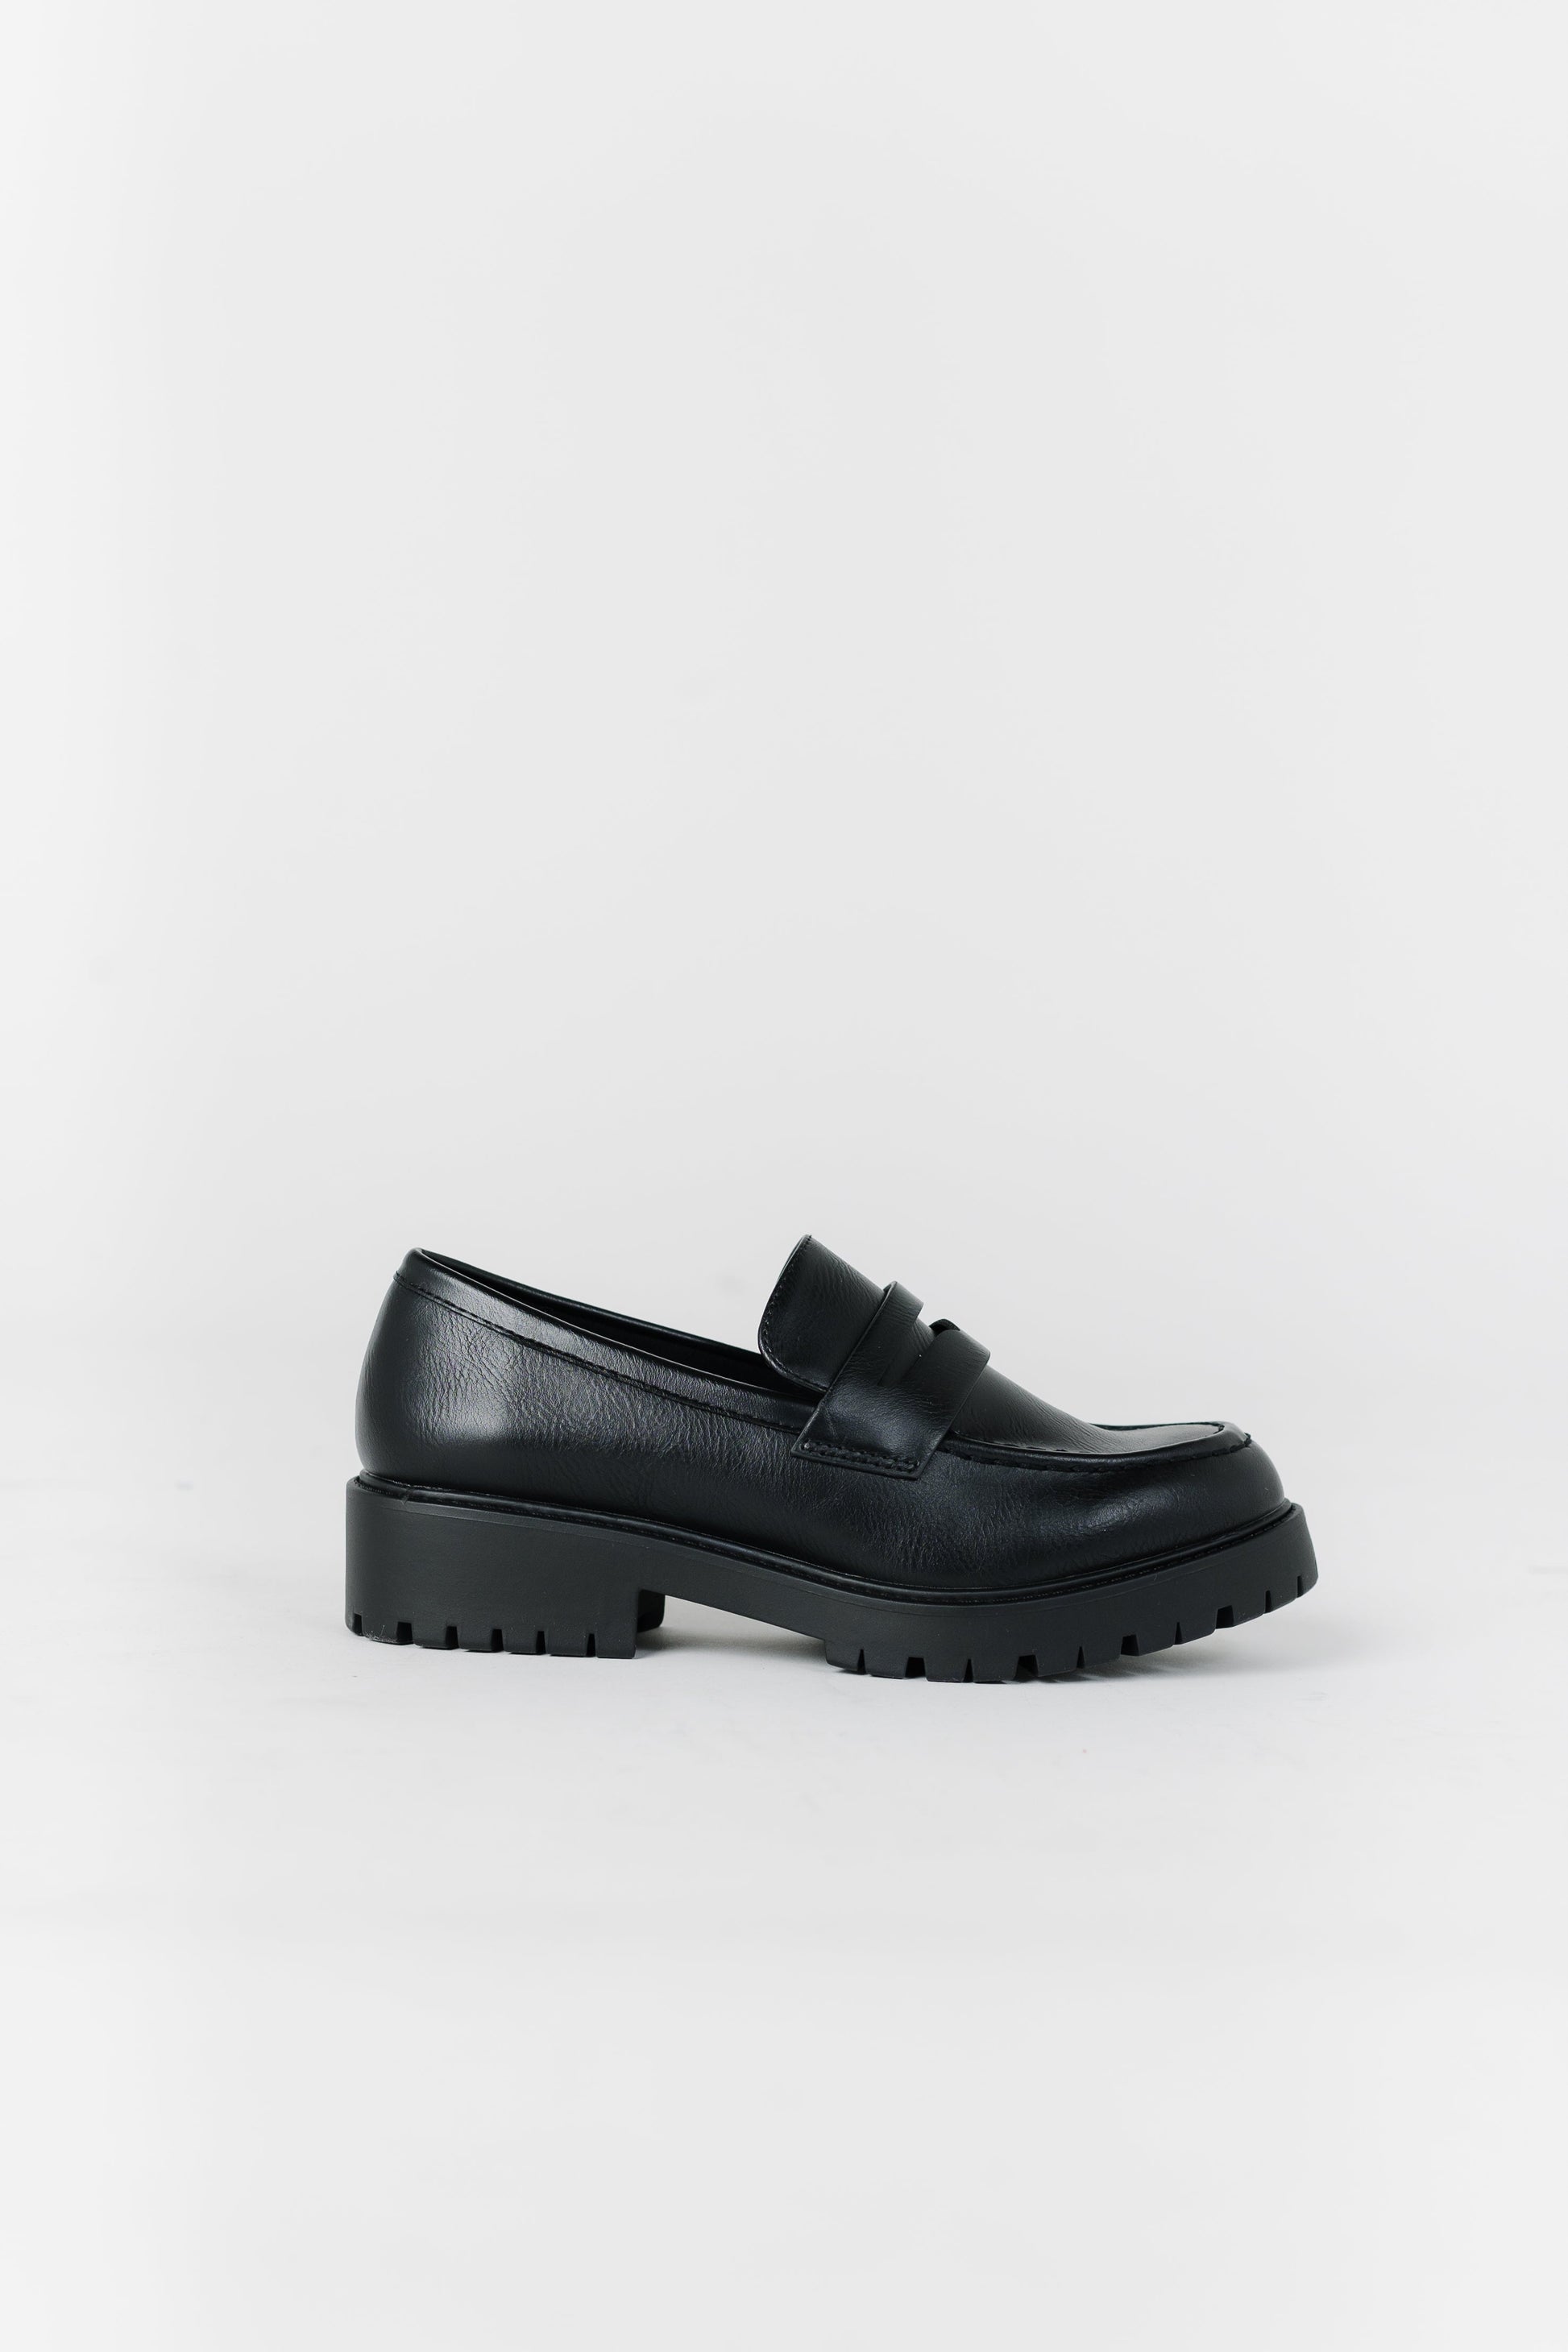 Hender Loafer WOMEN'S SHOES Fortune Dynamic 